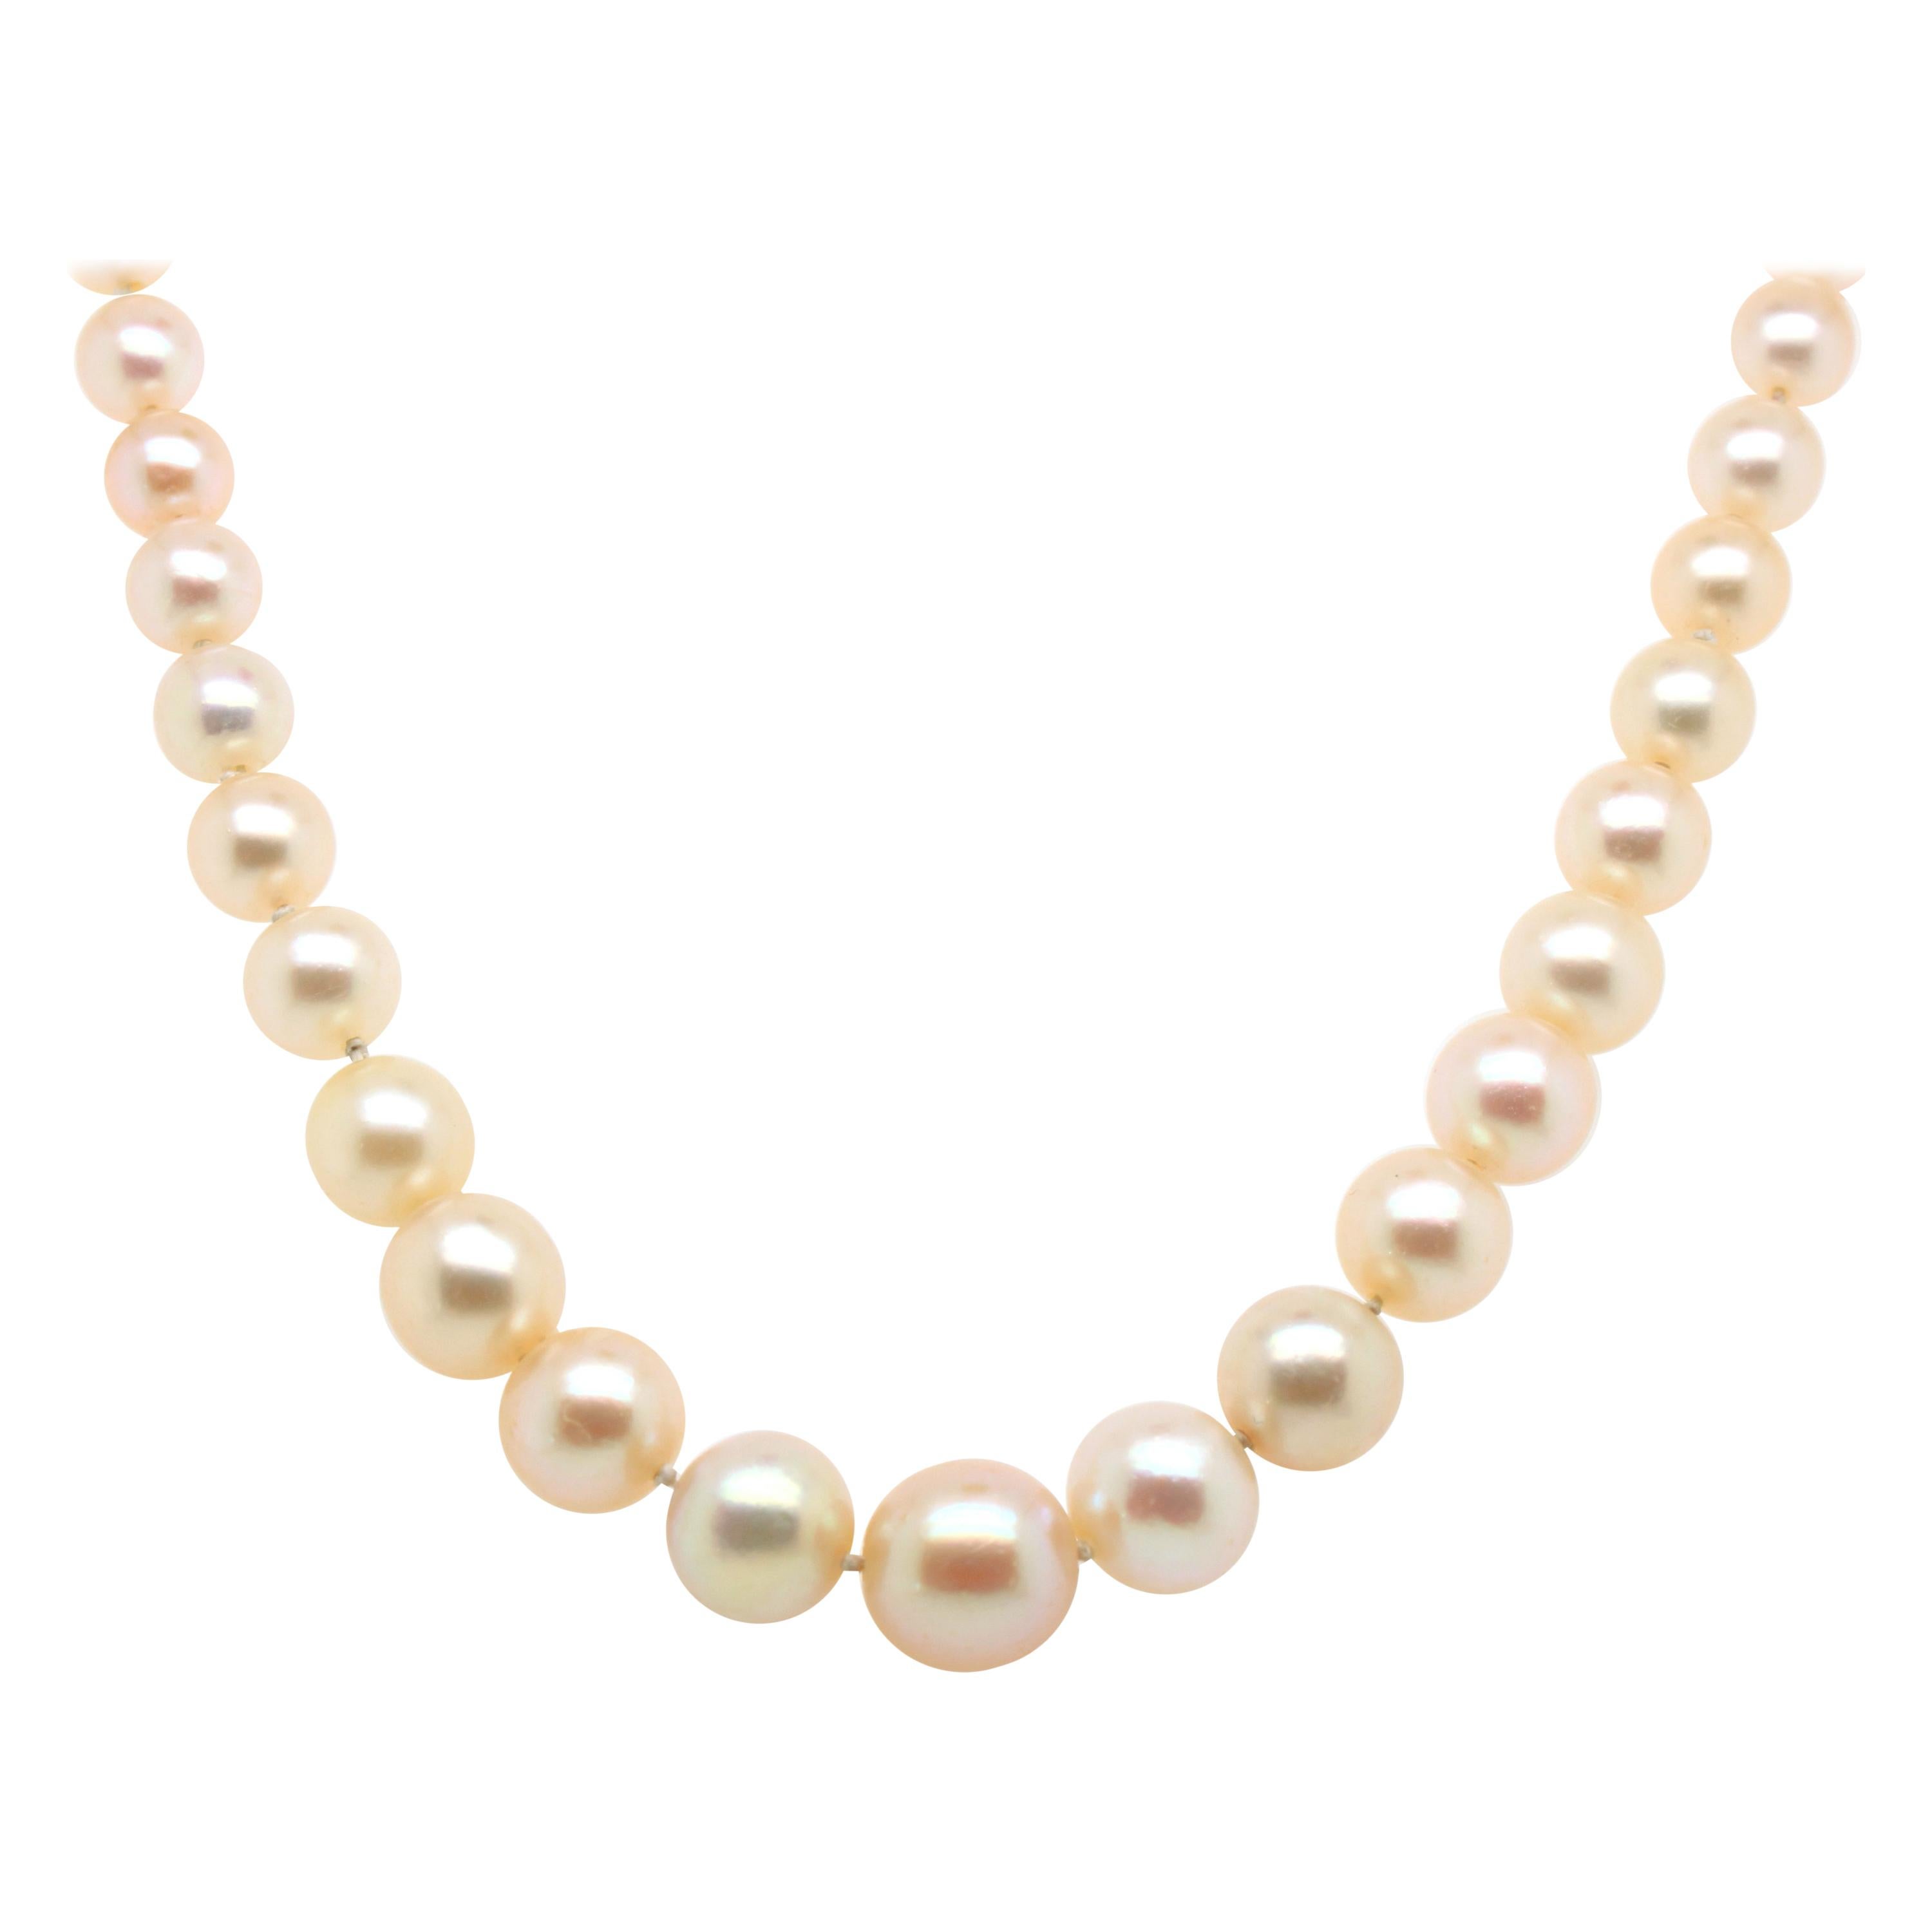 Natural Saltwater Pearl Necklace, circa 1920s